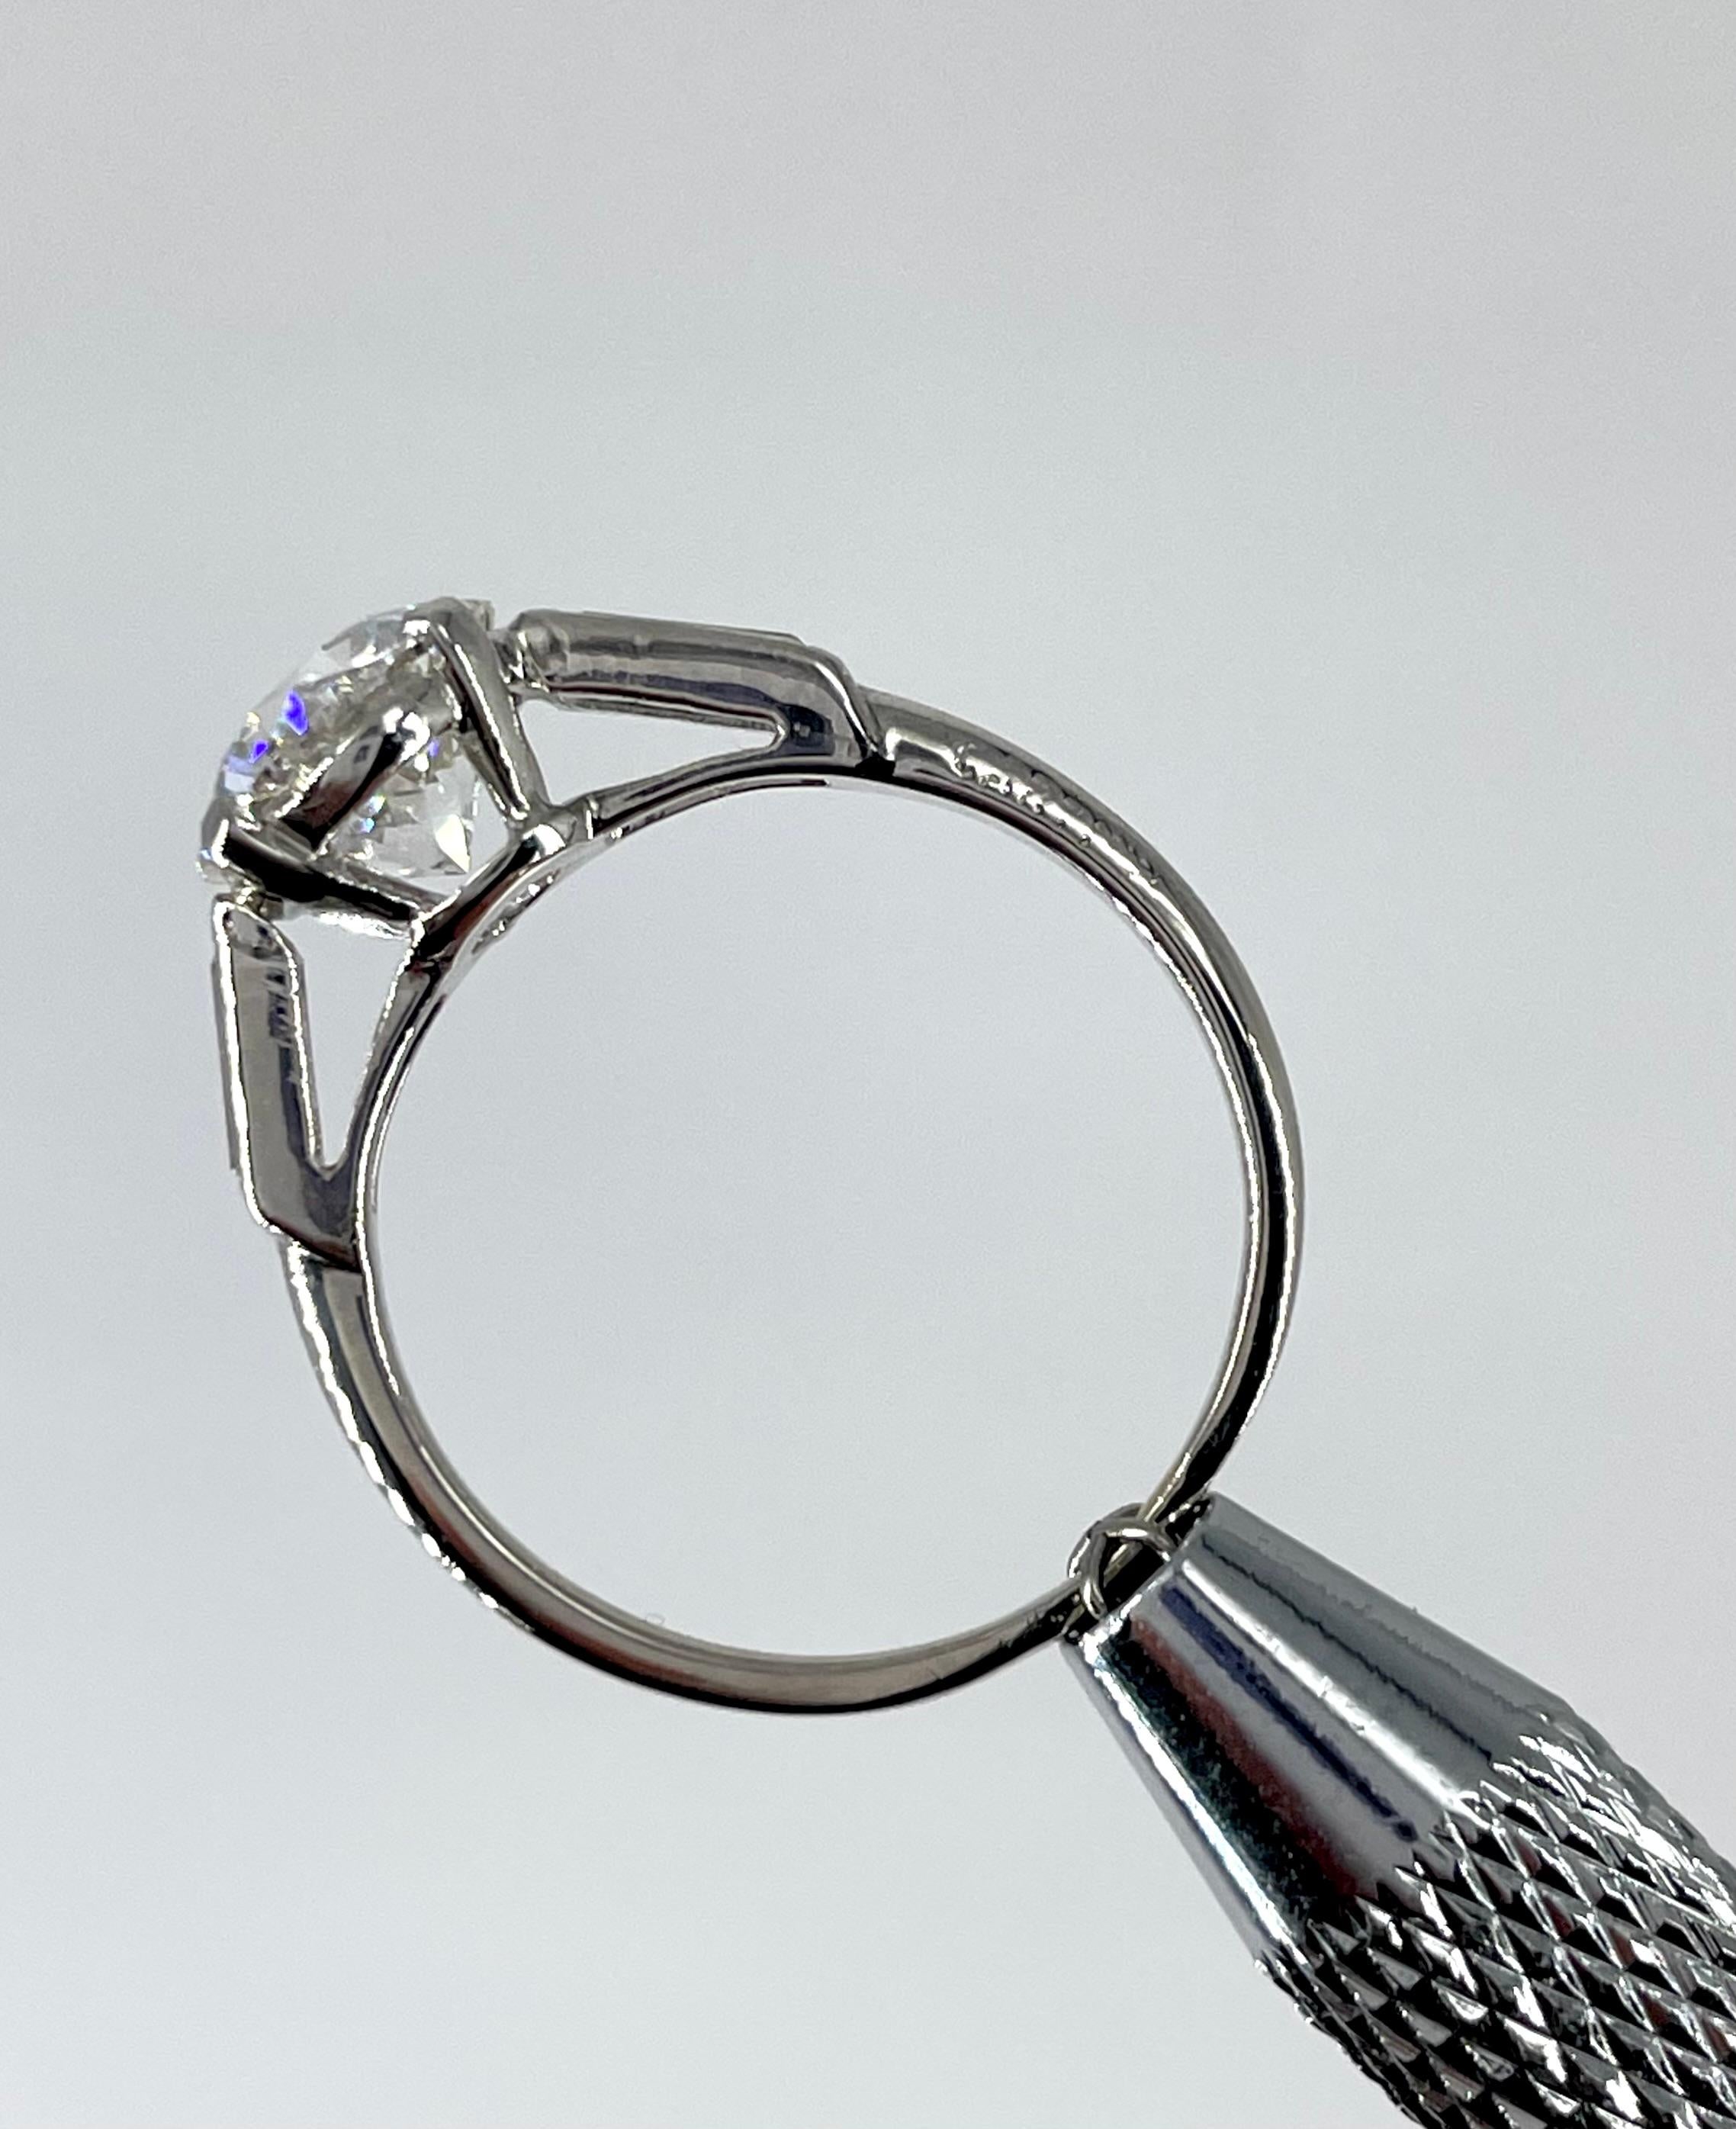 Cartier 1.57 carat GIA FVS1 Round Diamond Engagement Ring with Baguettes In Excellent Condition For Sale In New York, NY